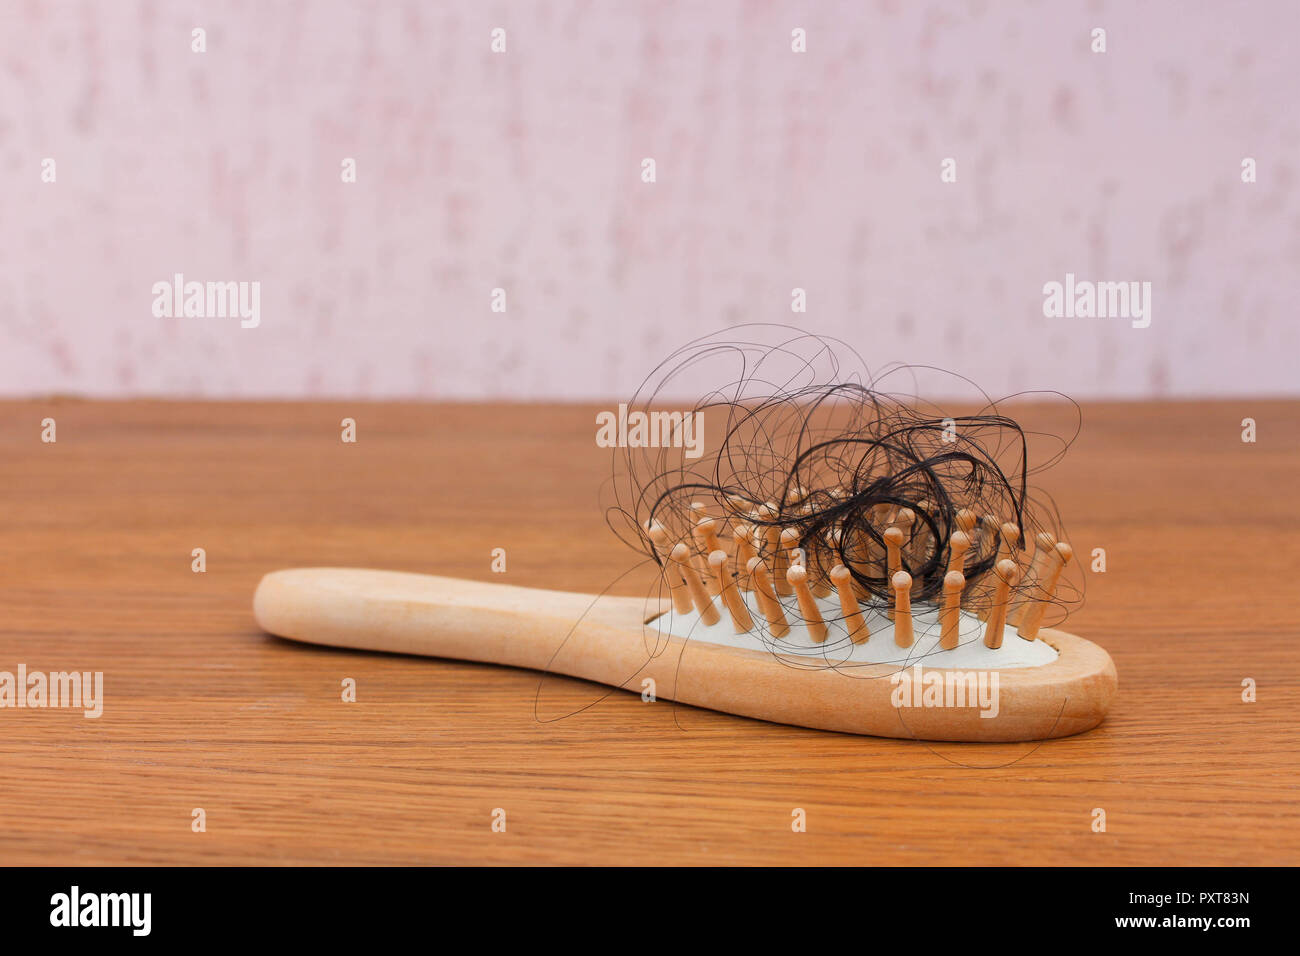 Fallen hair on the comb Stock Photo